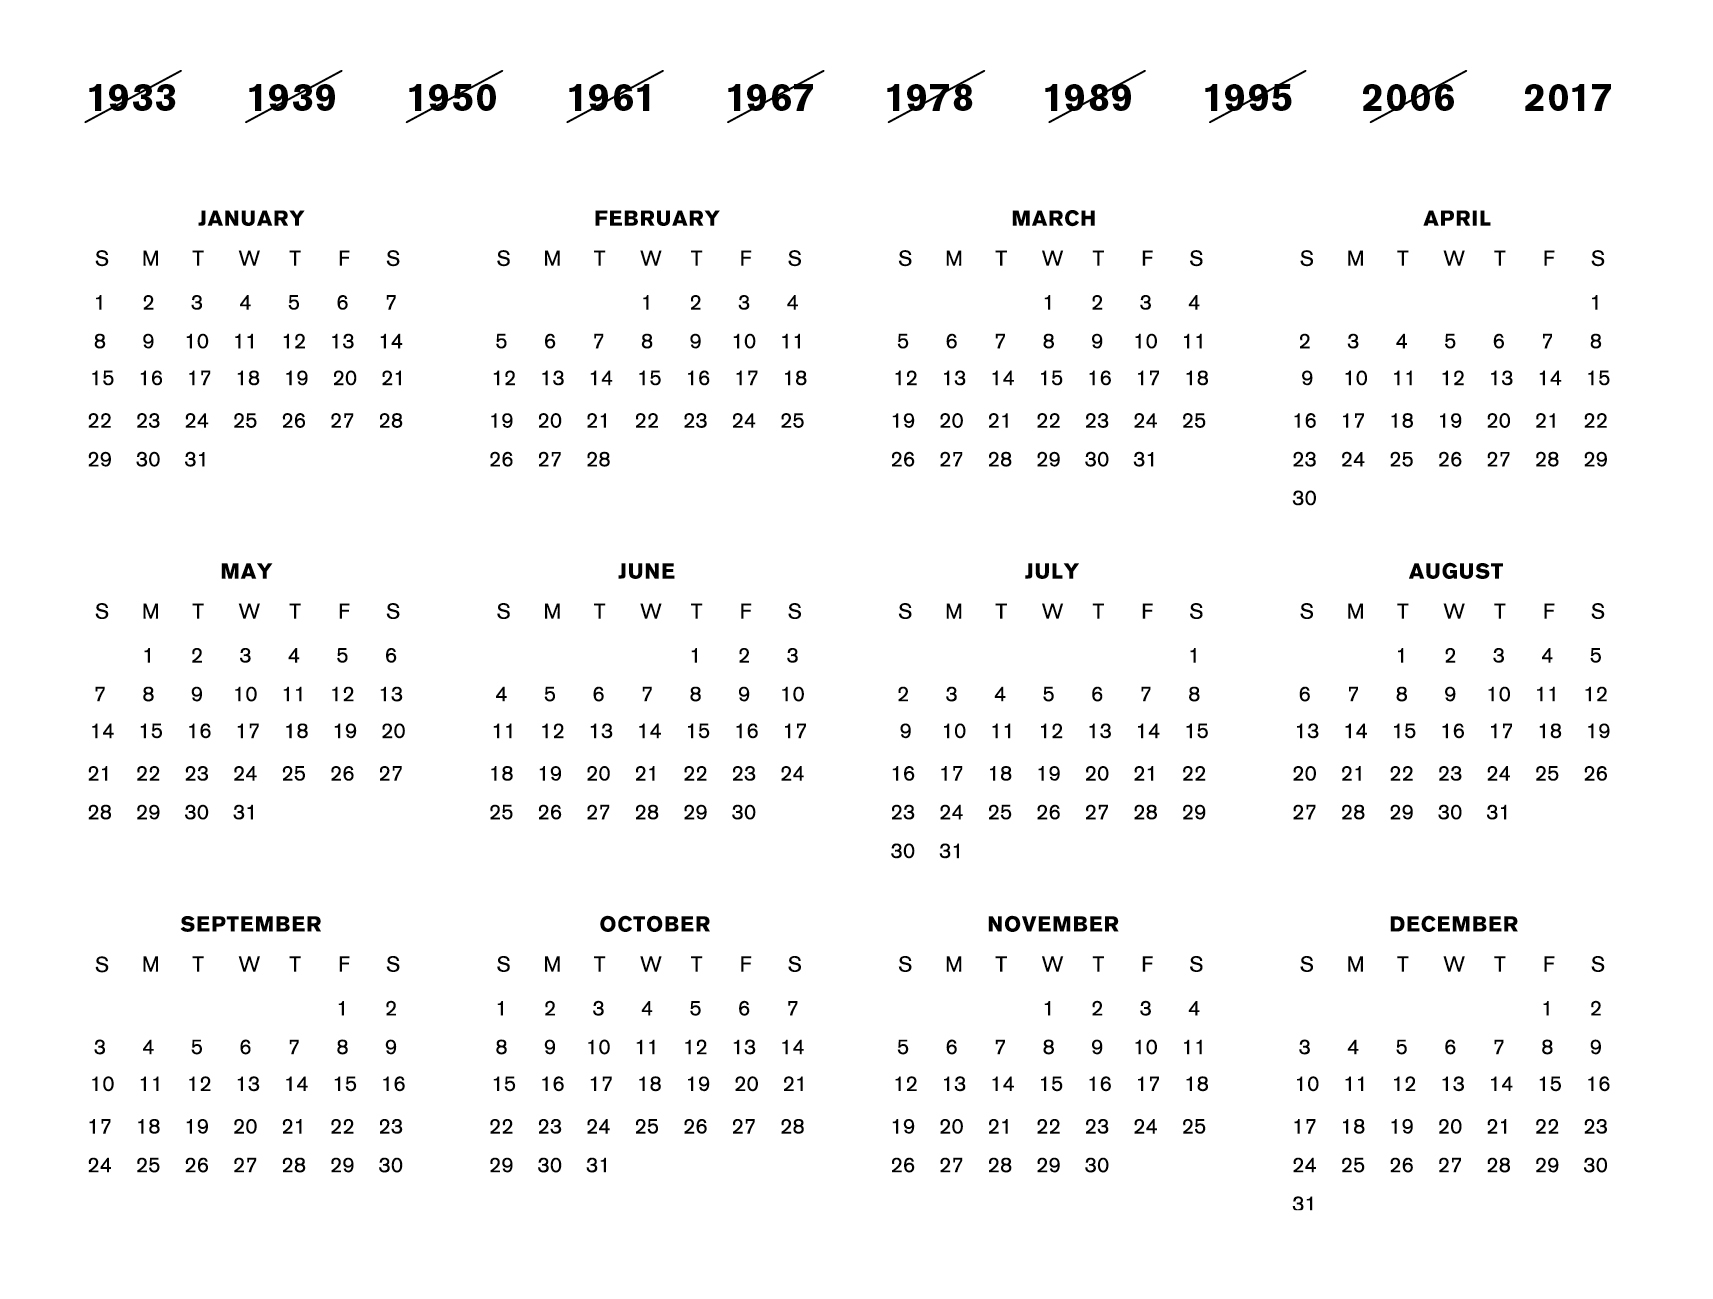 The front of a postcard, showing a calendar for years nineteen thirty three, nineteen thirty nine, nineteen fifty, nineteen sixty one, nineteen sixty seven, nineteen seventy eight, nineteen eighty nine, nineteen ninety five, two thousand and six, and twenty seventeen. The calendar is exactly the same in all years.